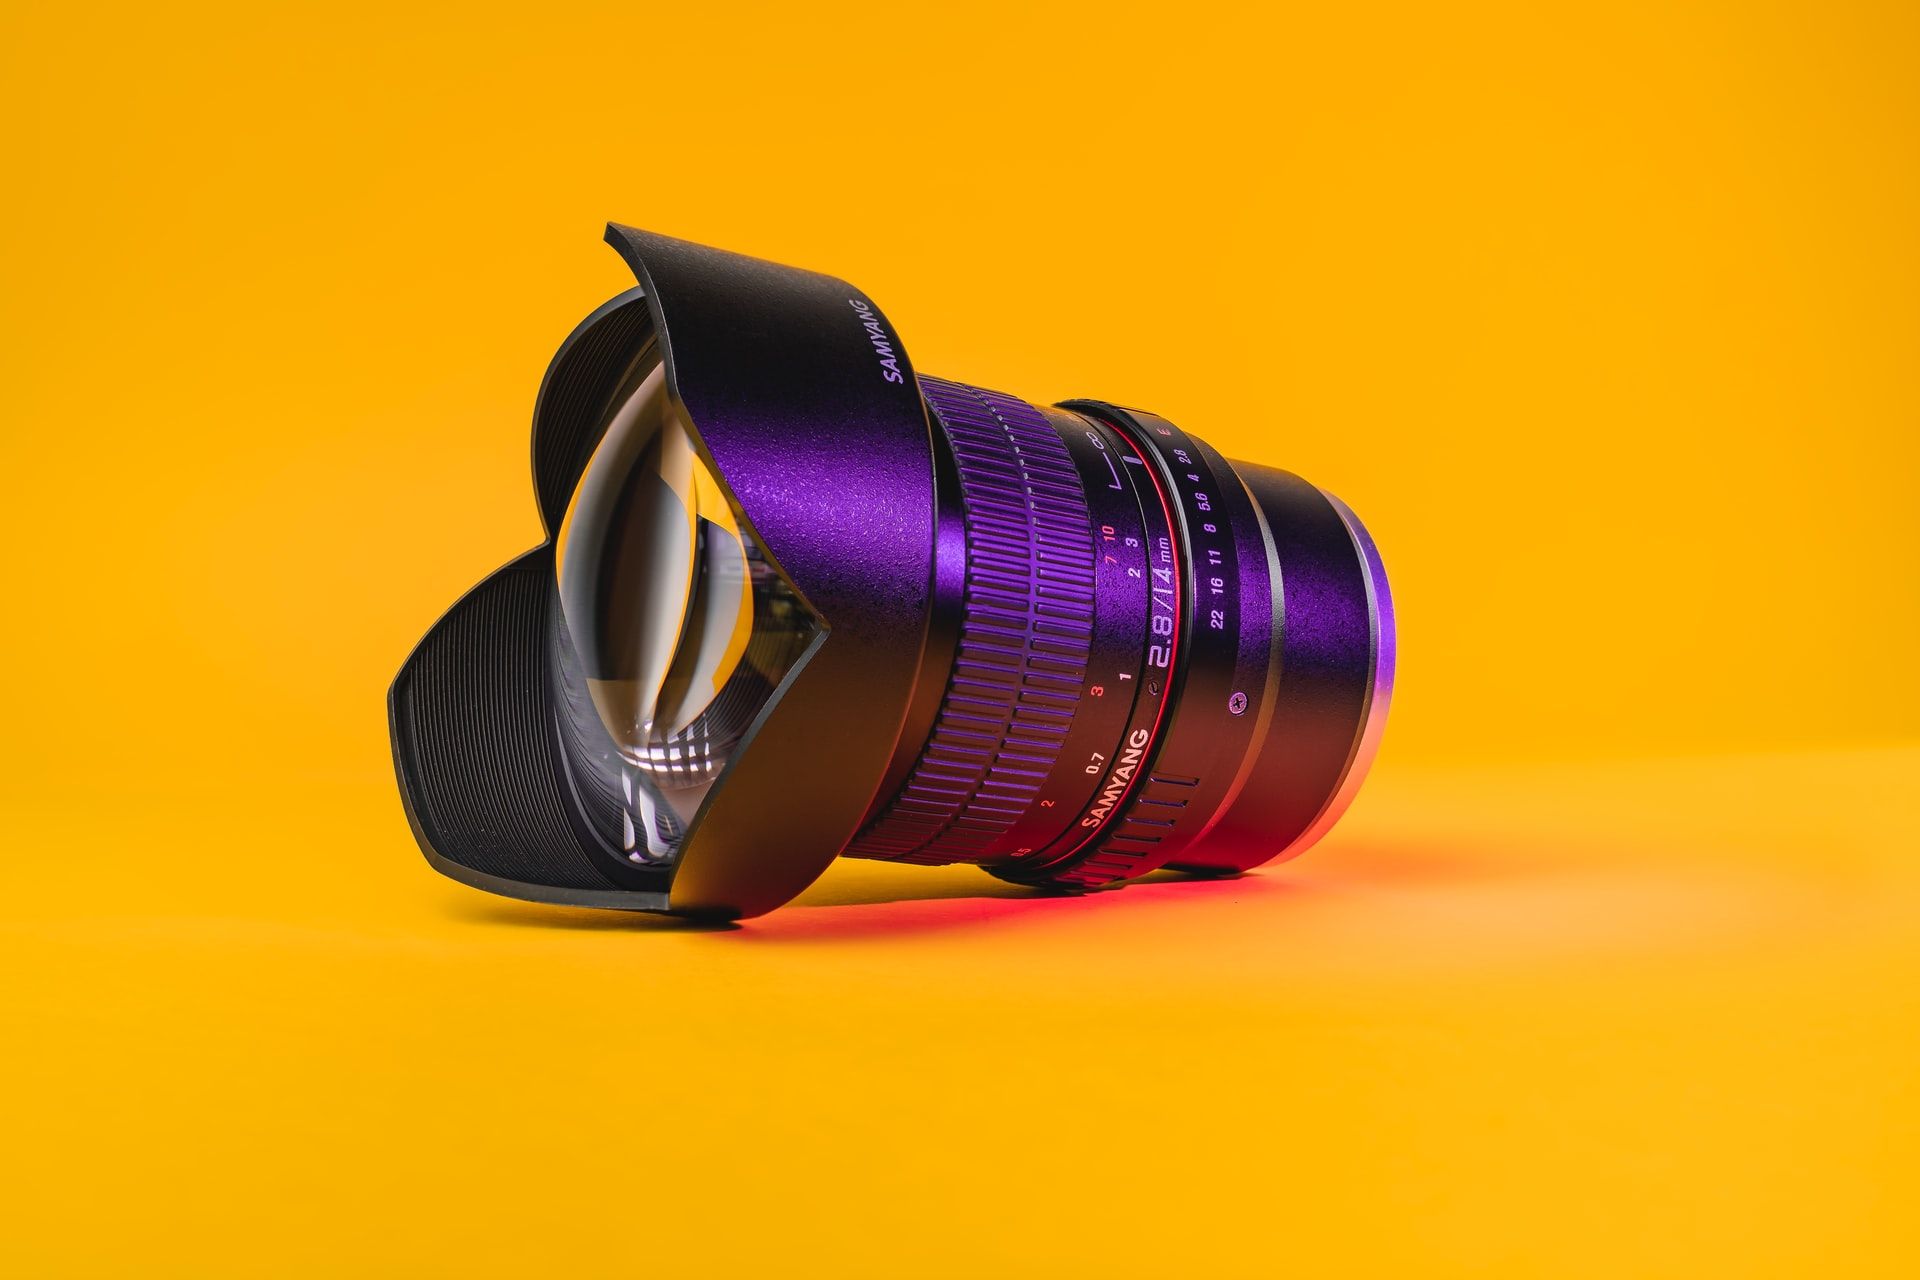 samyang 14mm f/2.8 wide angle lens on yellow background